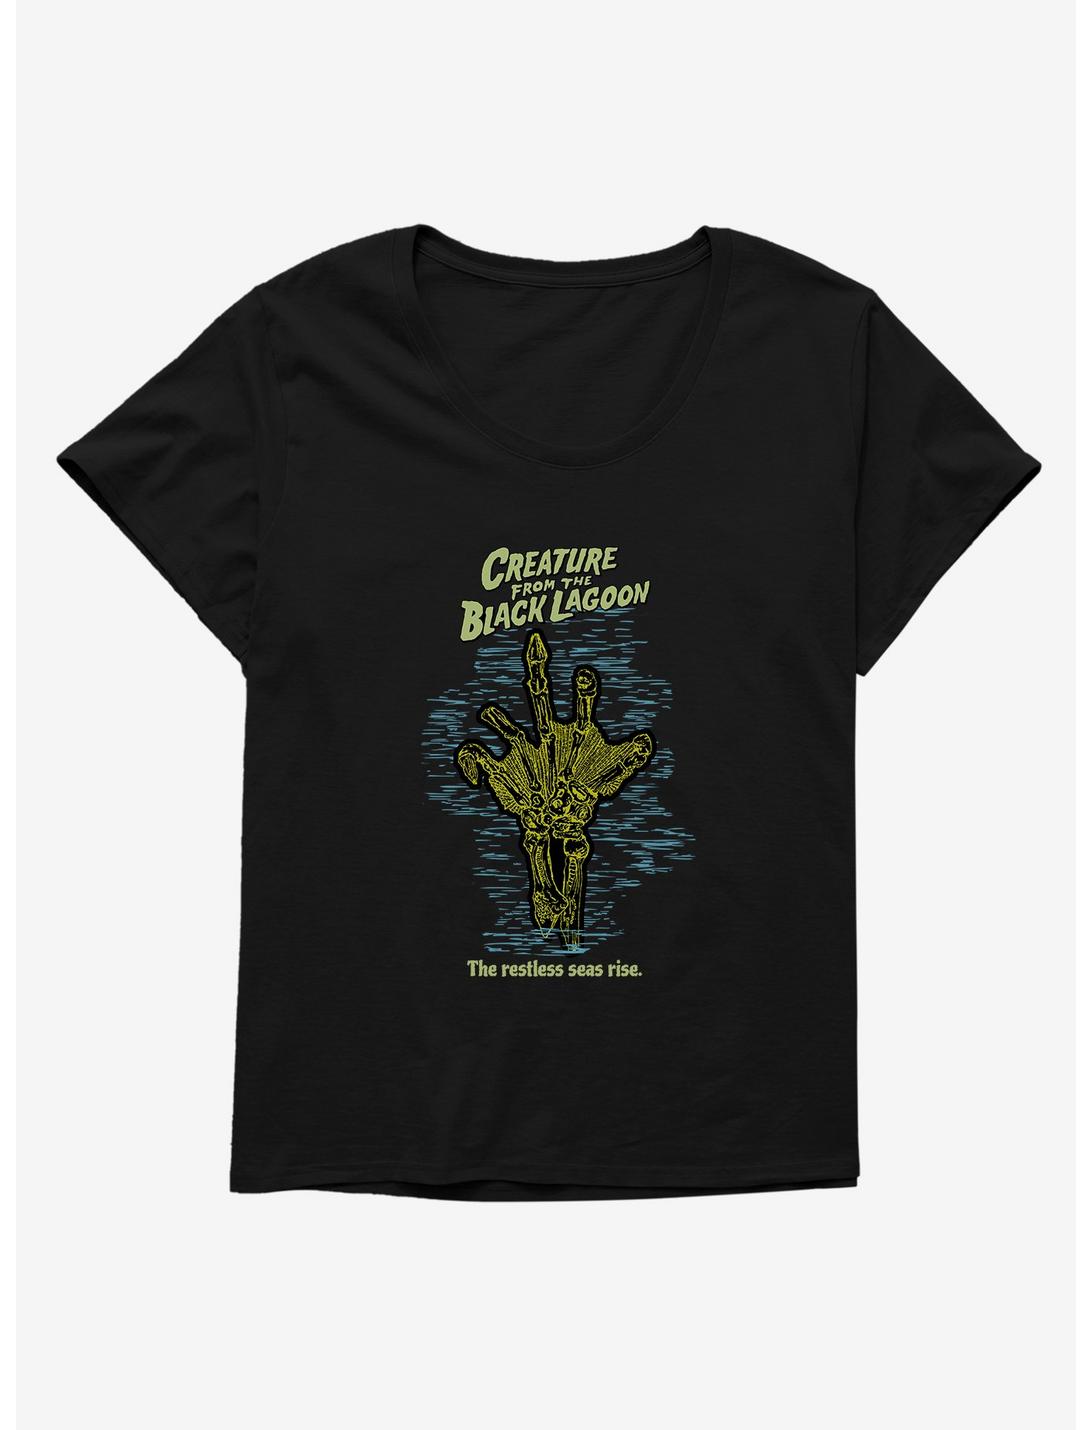 Creature From The Black Lagoon Restless Seas Rise Womens T-Shirt Plus Size, BLACK, hi-res